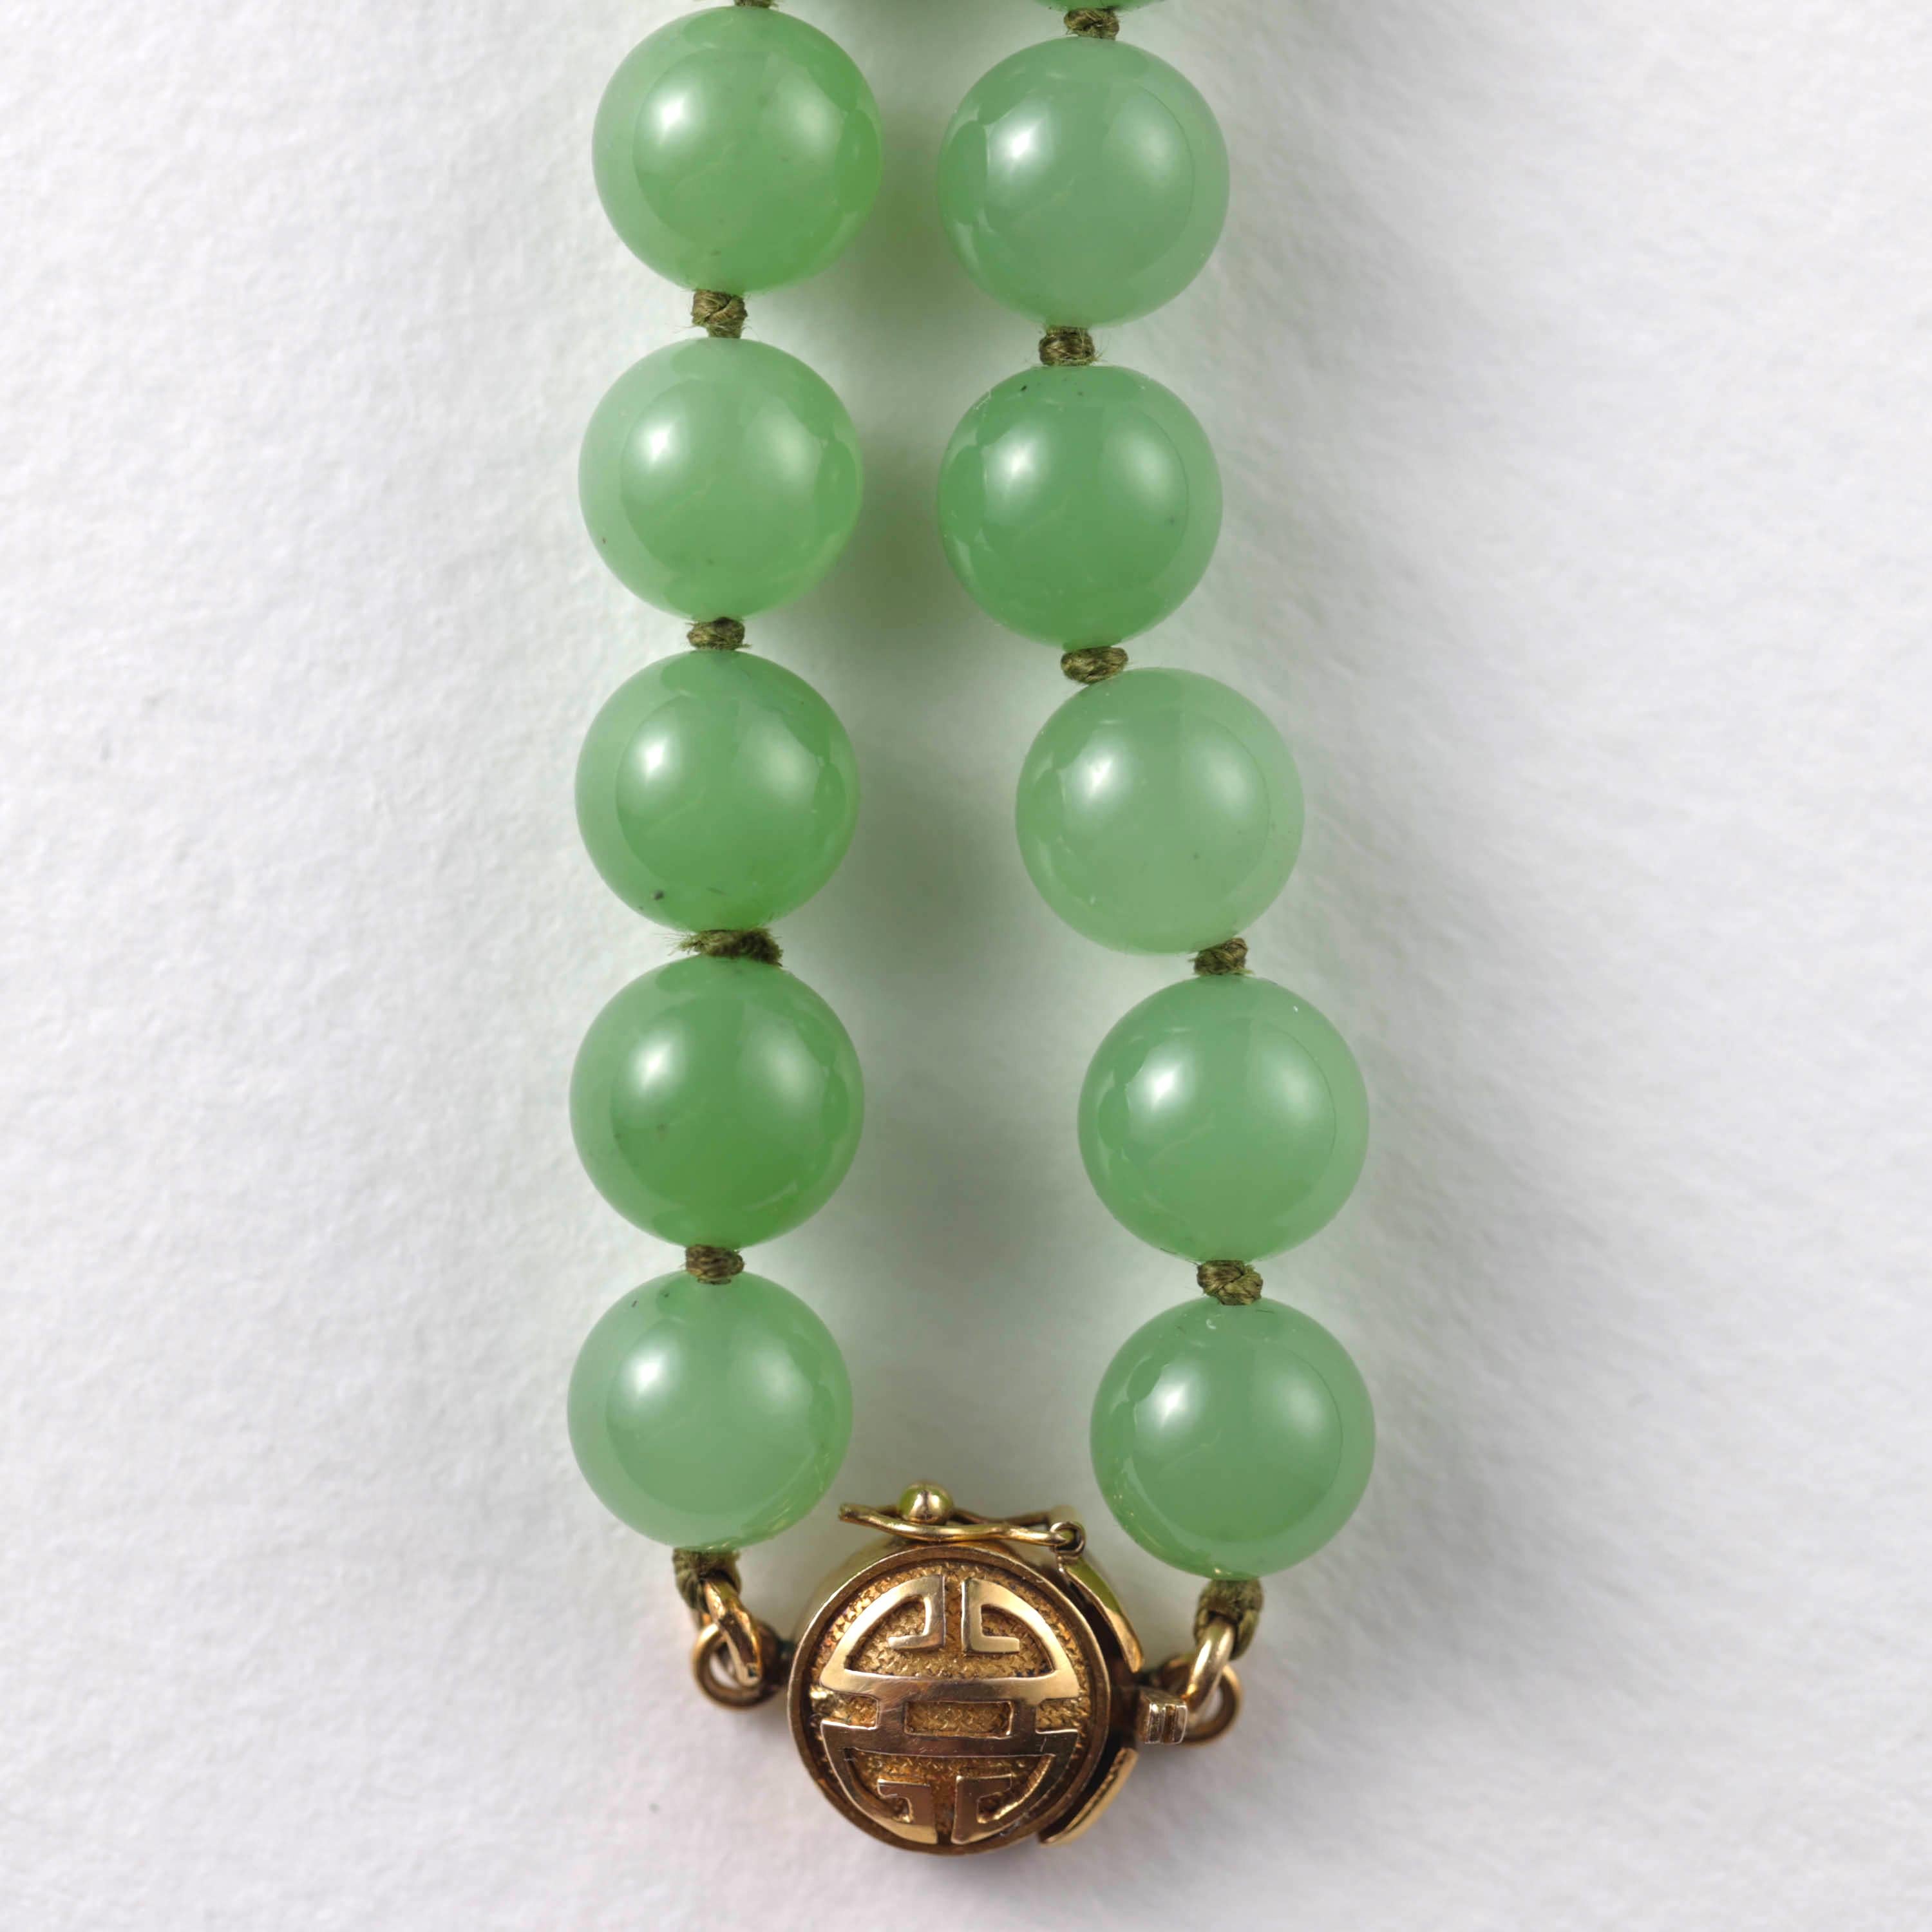 Bead Rare Gump's Jade Necklace, Impossibly Translucent Nephrite 16 ¾